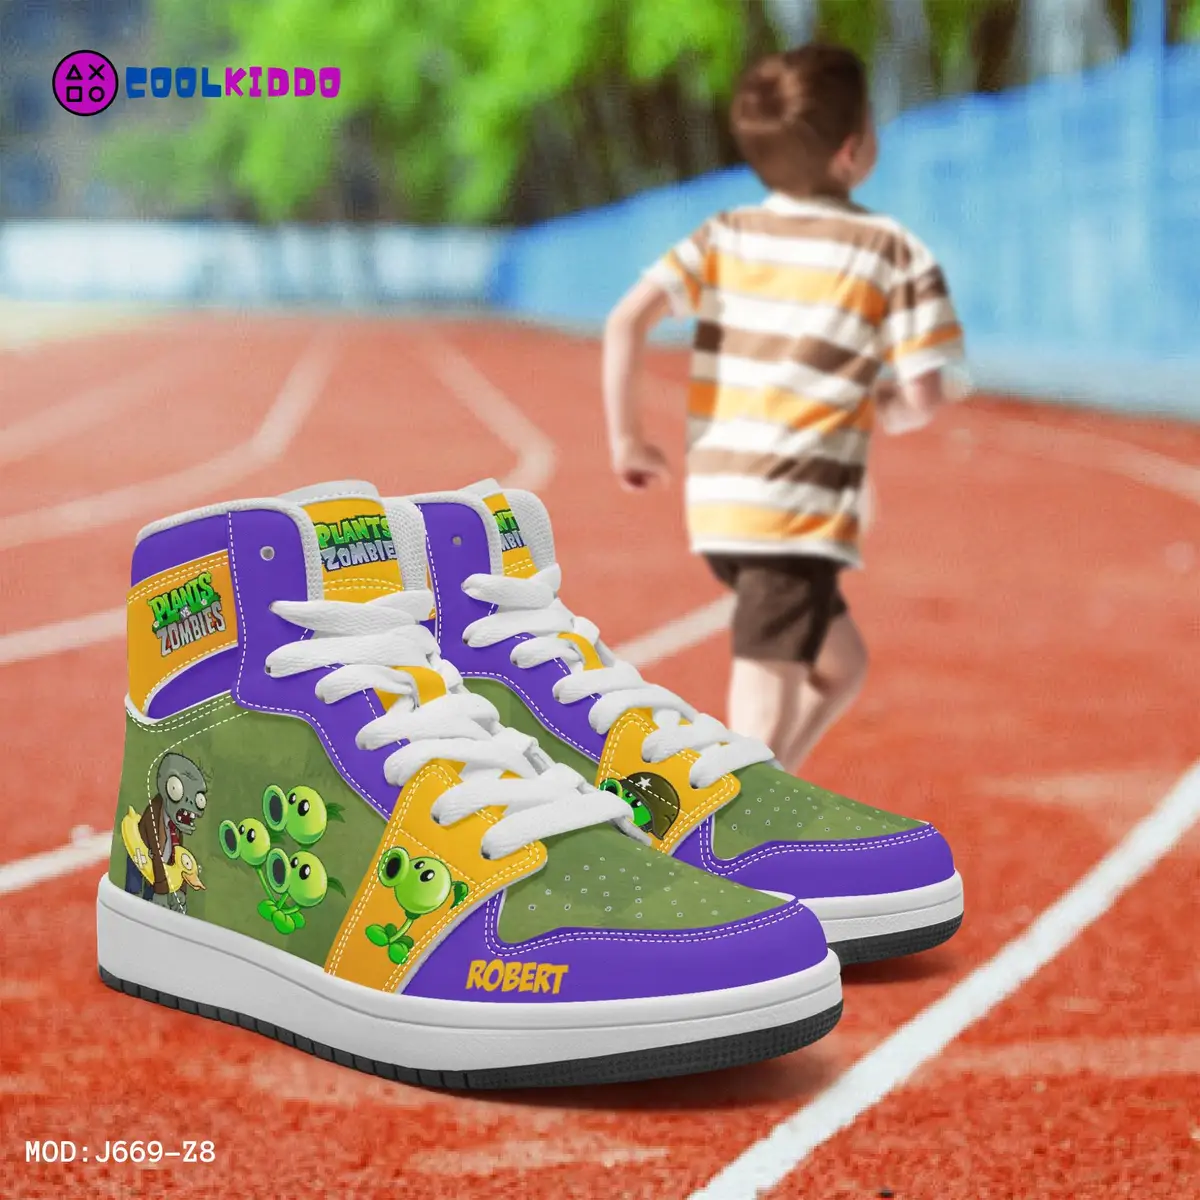 Personalized Plants vs Zombies Characters High-Top Leather Sneakers – Jordans Style Shoes Cool Kiddo 18